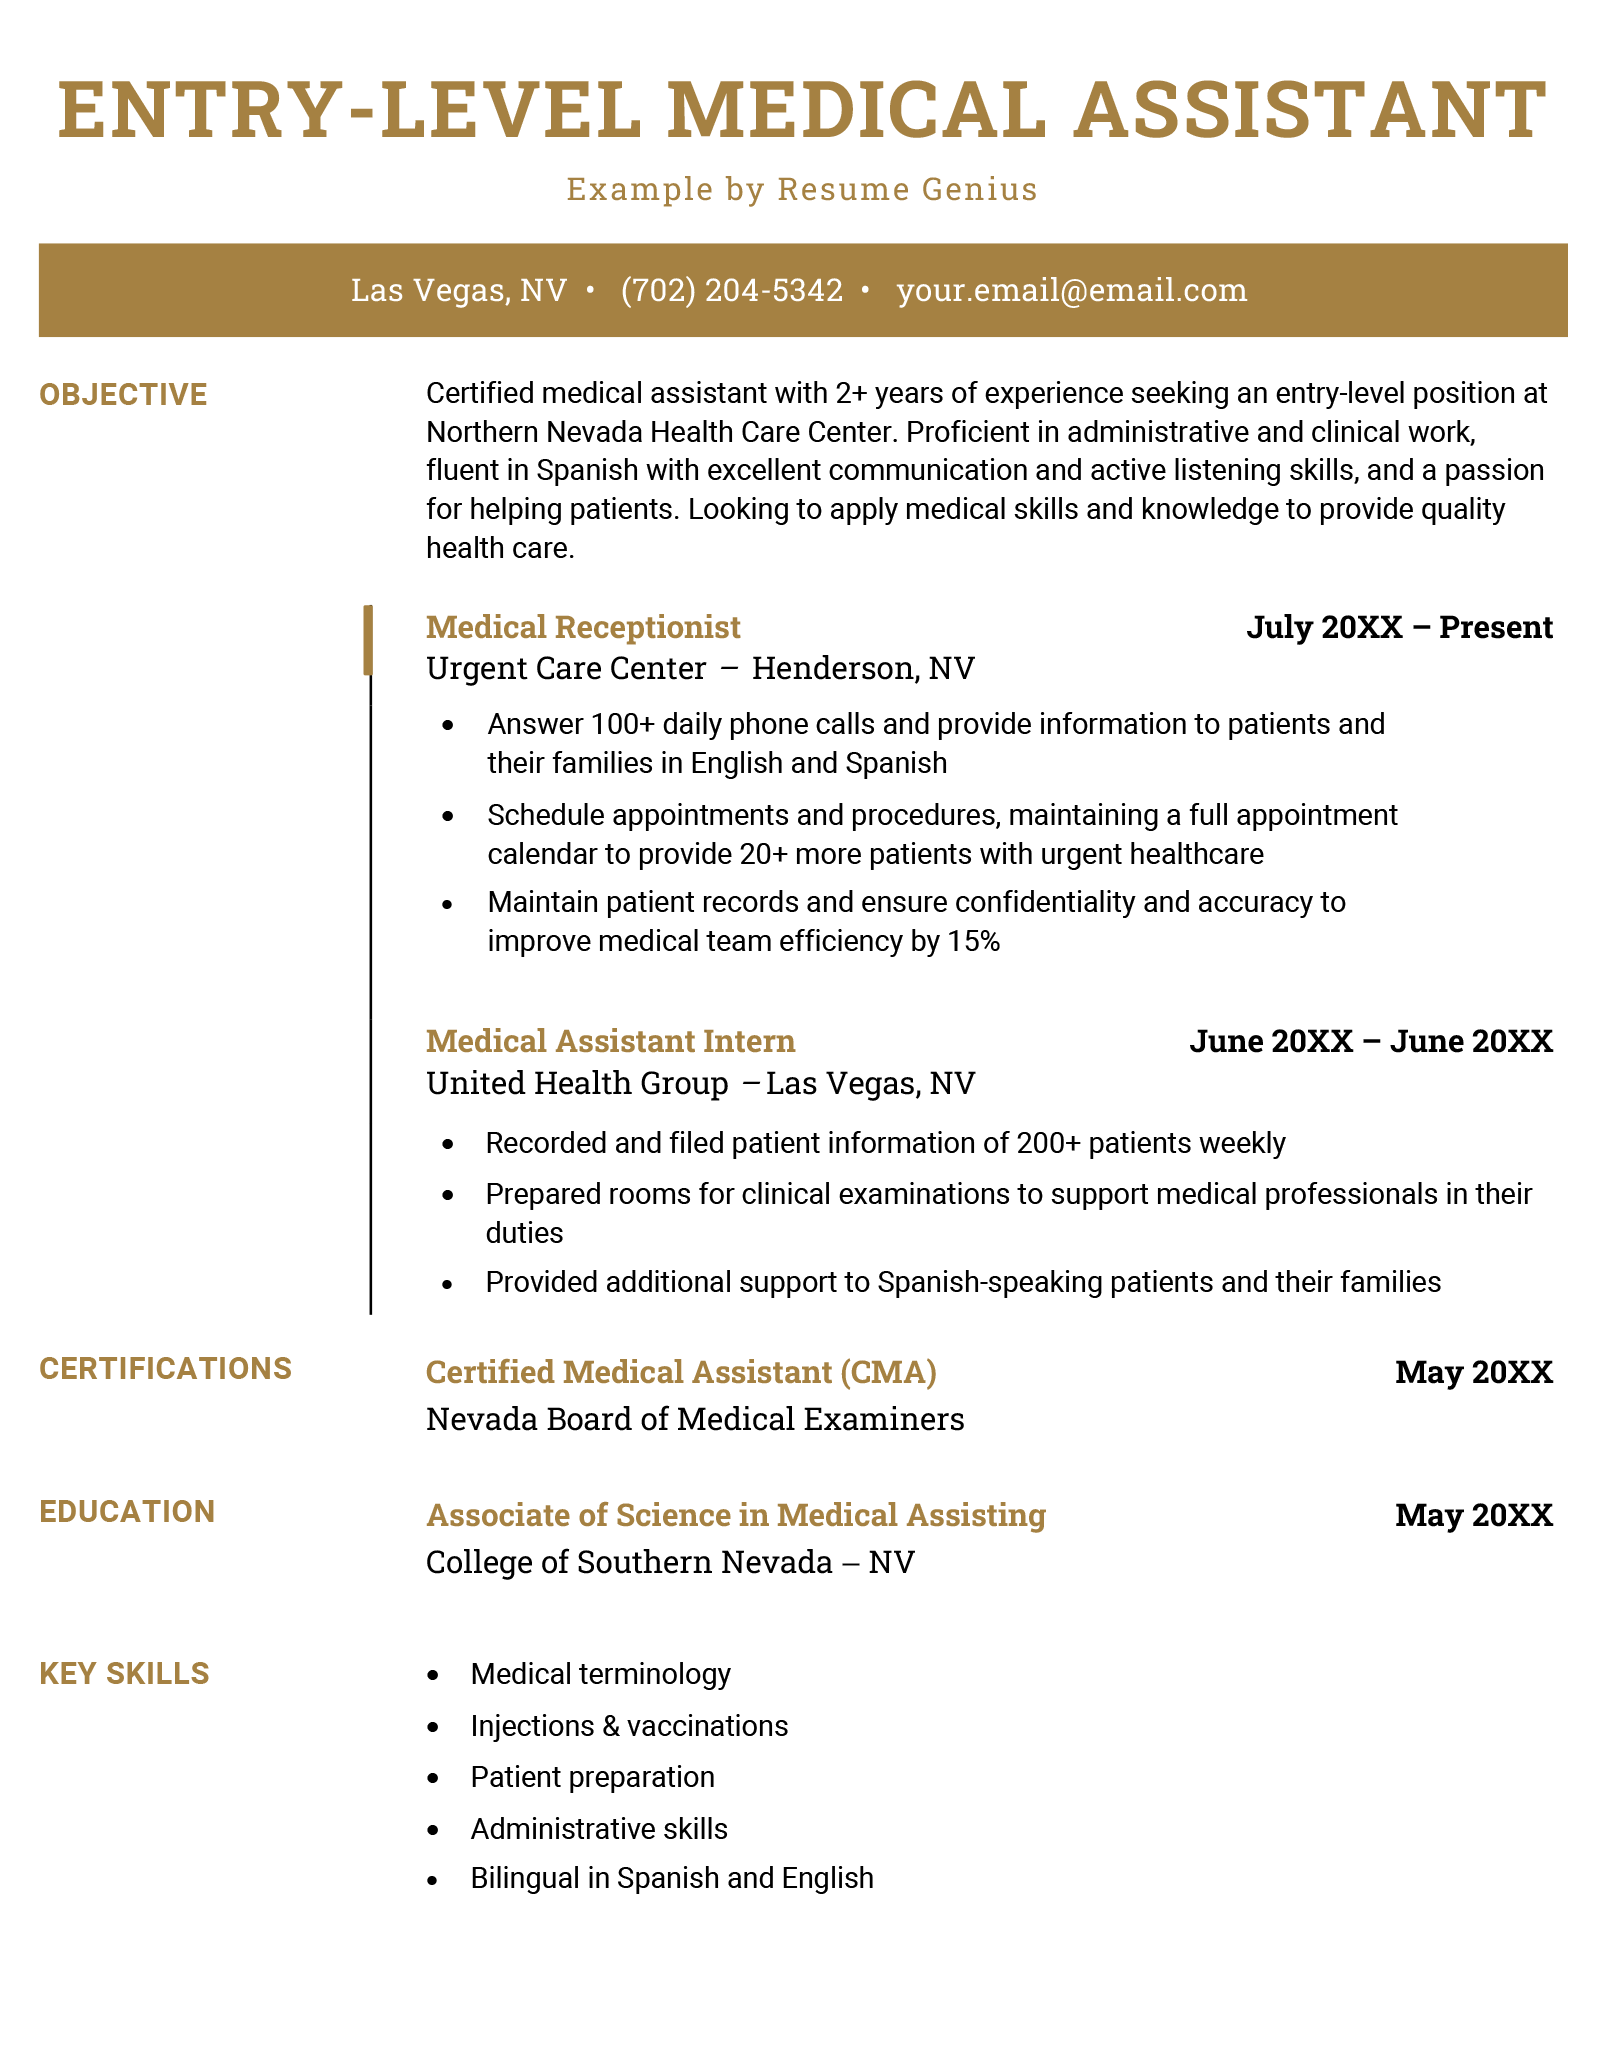 example of an entry level medical assistant resume with a khaki color header